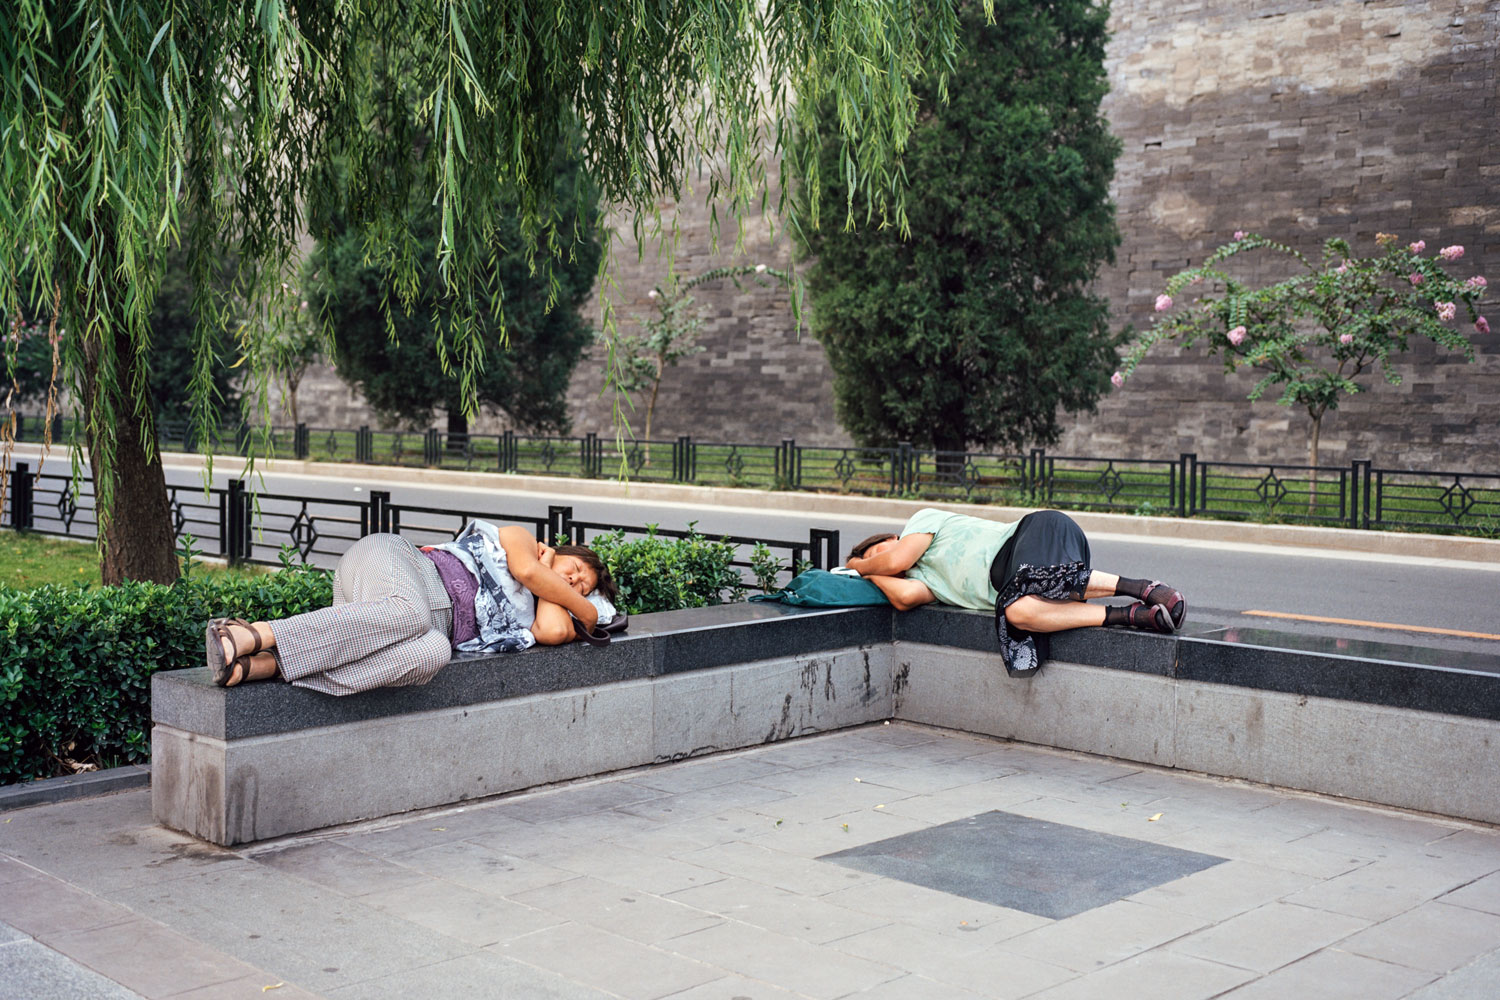 Napping outside the Forbidden City